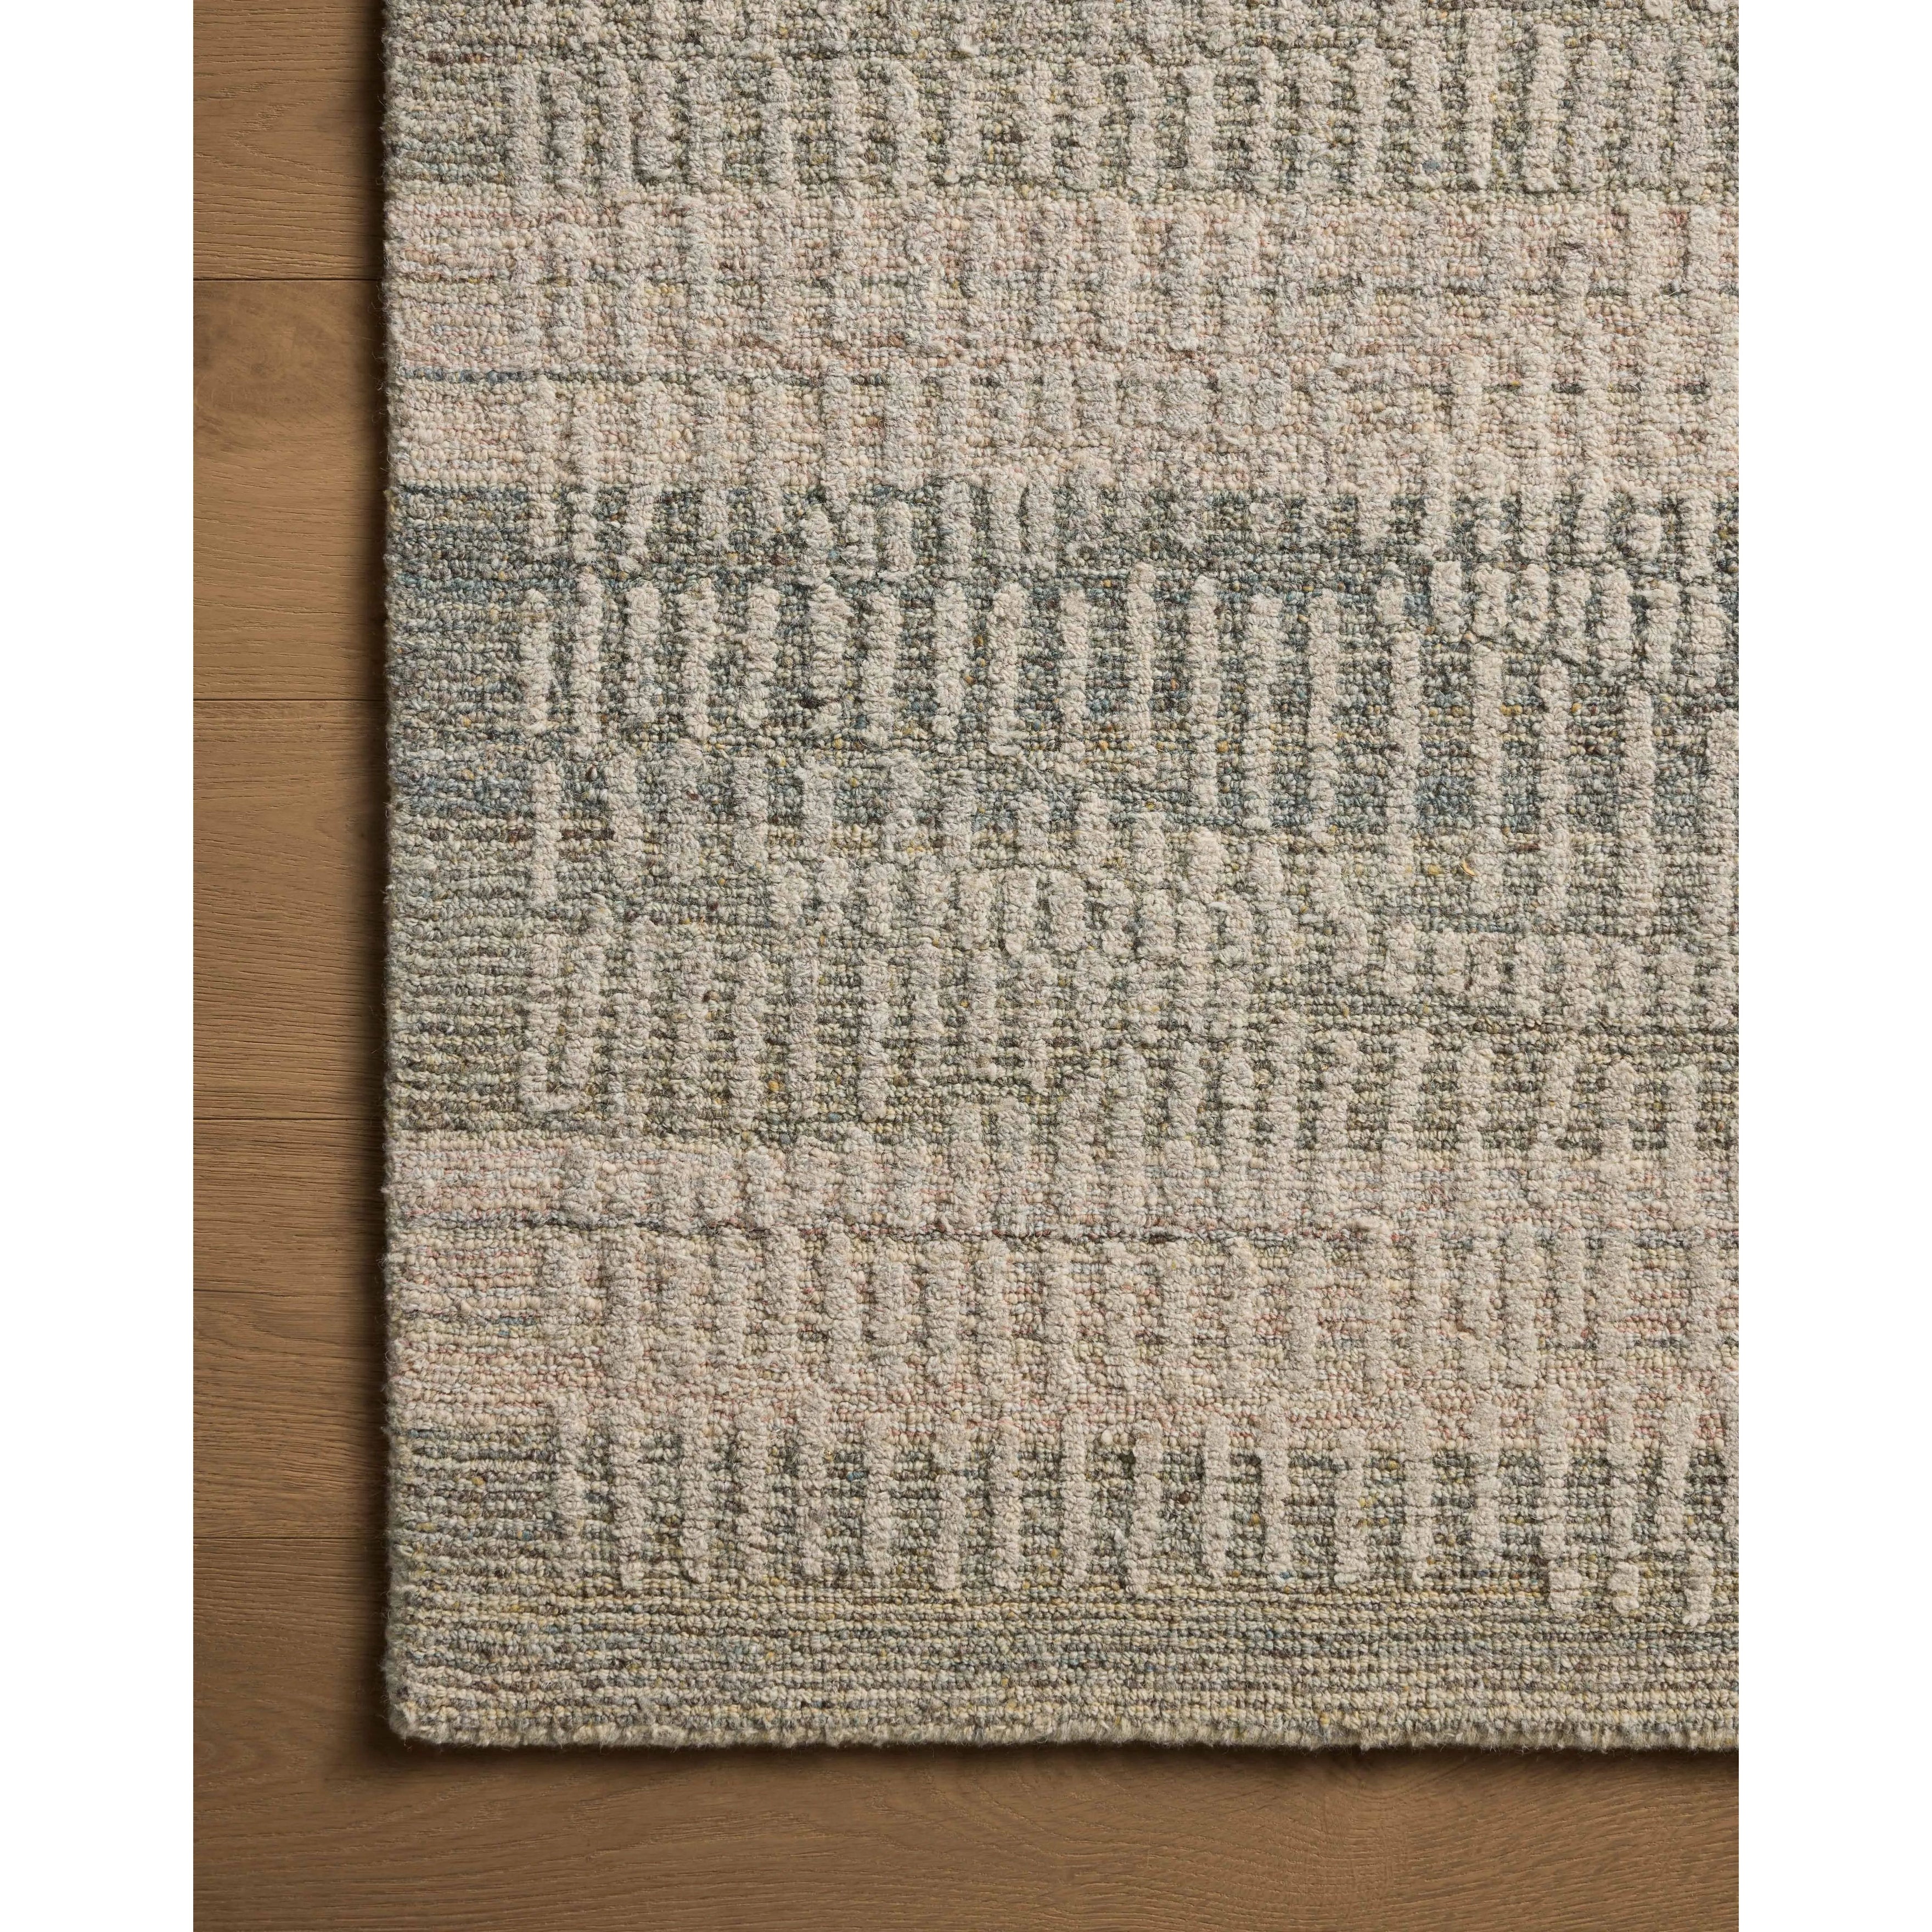 The Elias Earth / Blush Rug is a hand-tufted wool area rug with lively graphic patterns in earth and stone tones. There’s a unique texture to the rug made by over-tufting, in which a design is hand-tufted over a tufted base, creating a subtle high-low pile. Amethyst Home provides interior design, new home construction design consulting, vintage area rugs, and lighting in the Tampa metro area.